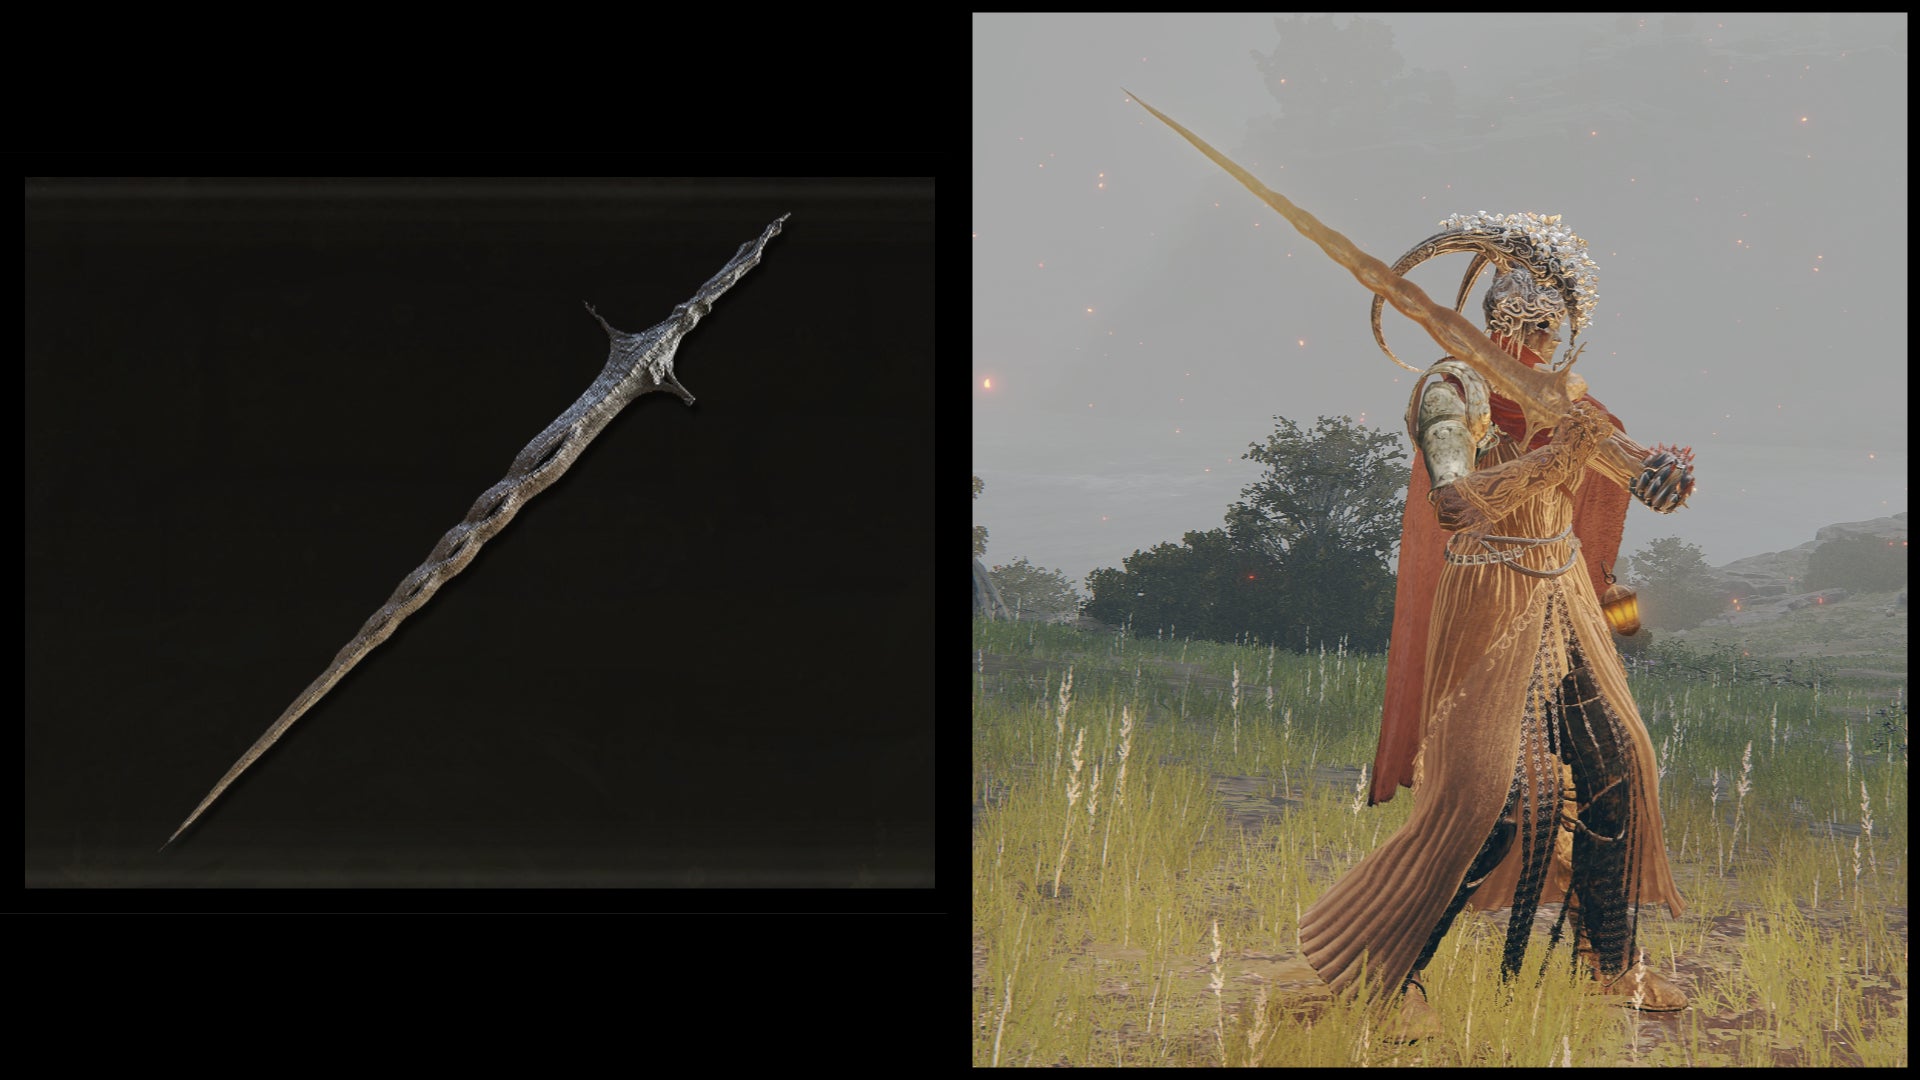 Left: an illustration of the Sacred Relic from Elden Ring. Right: the player character holding the same weapon against a Limgrave background.